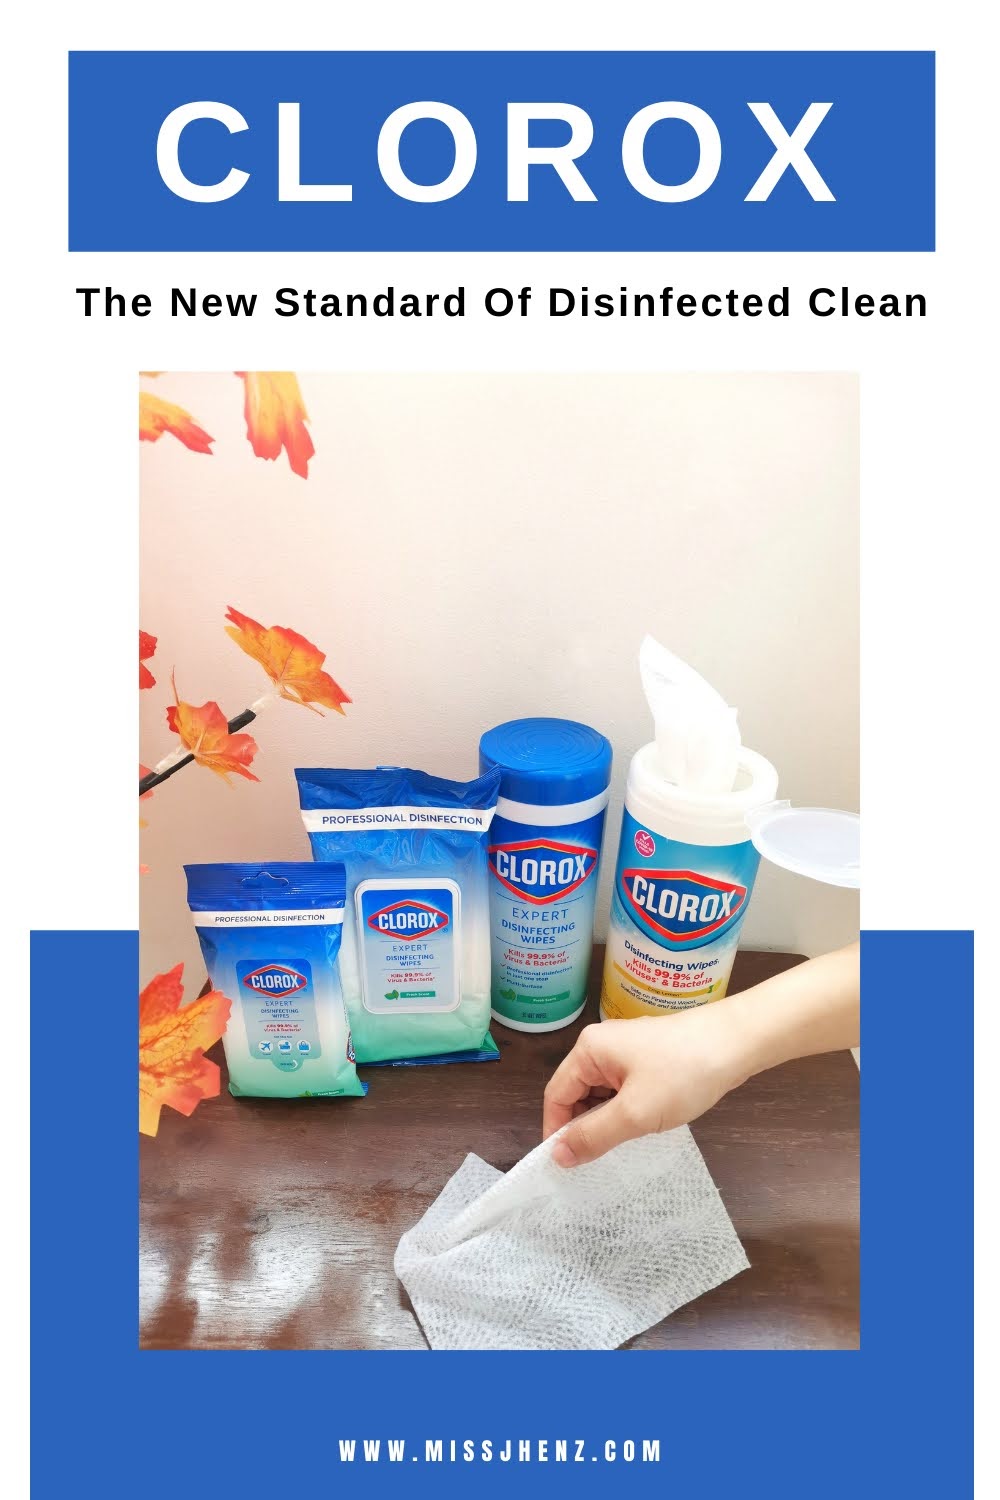 Clorox The New Standard Of Disinfected Clean